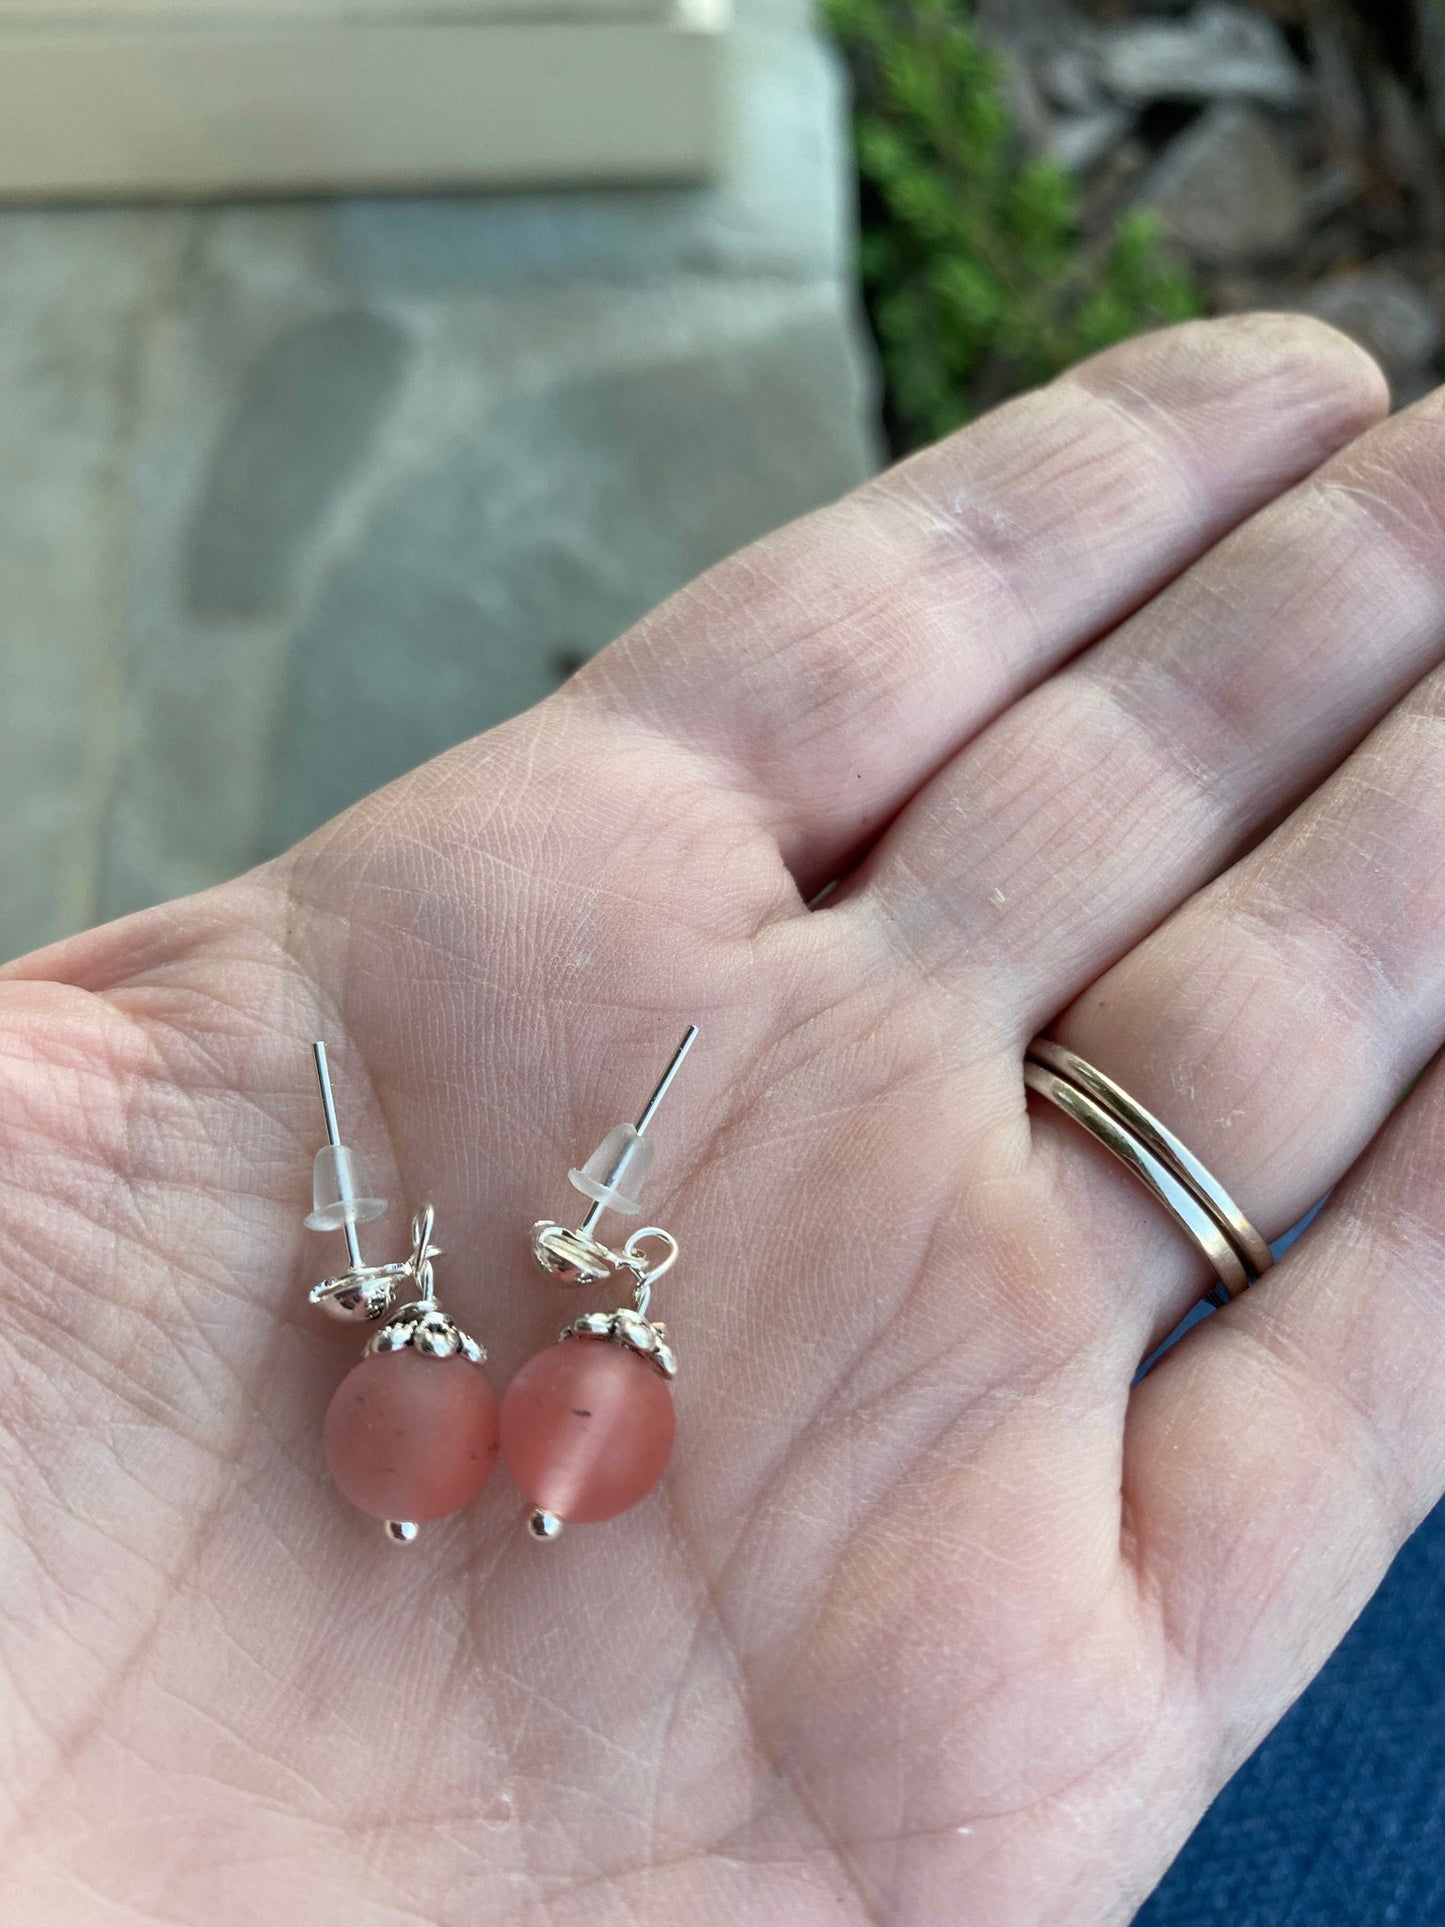 Frosted Pink Beaded Earrings Dangling From A Silver Post